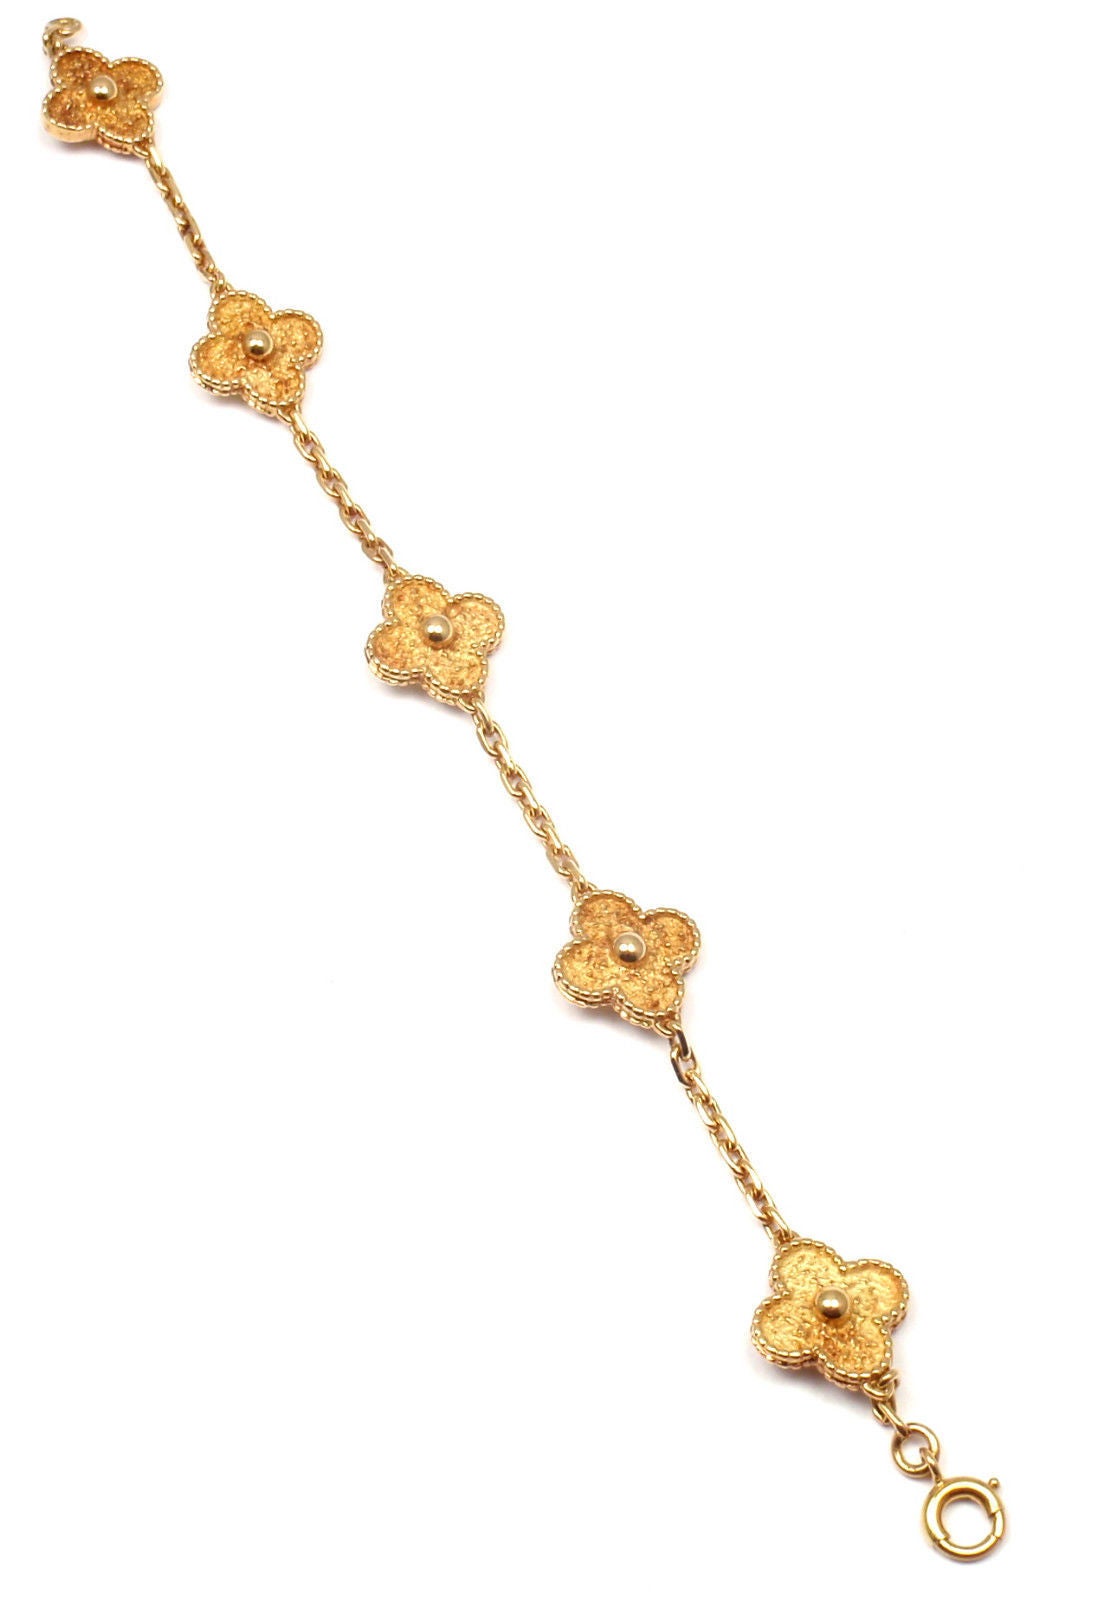 18k Yellow Gold Vintage Alhambra Yellow Gold Bracelet by Van Cleef & Arpels. With five Motifs made out of 18k Yellow Gold. 

Details: 
Length: 7